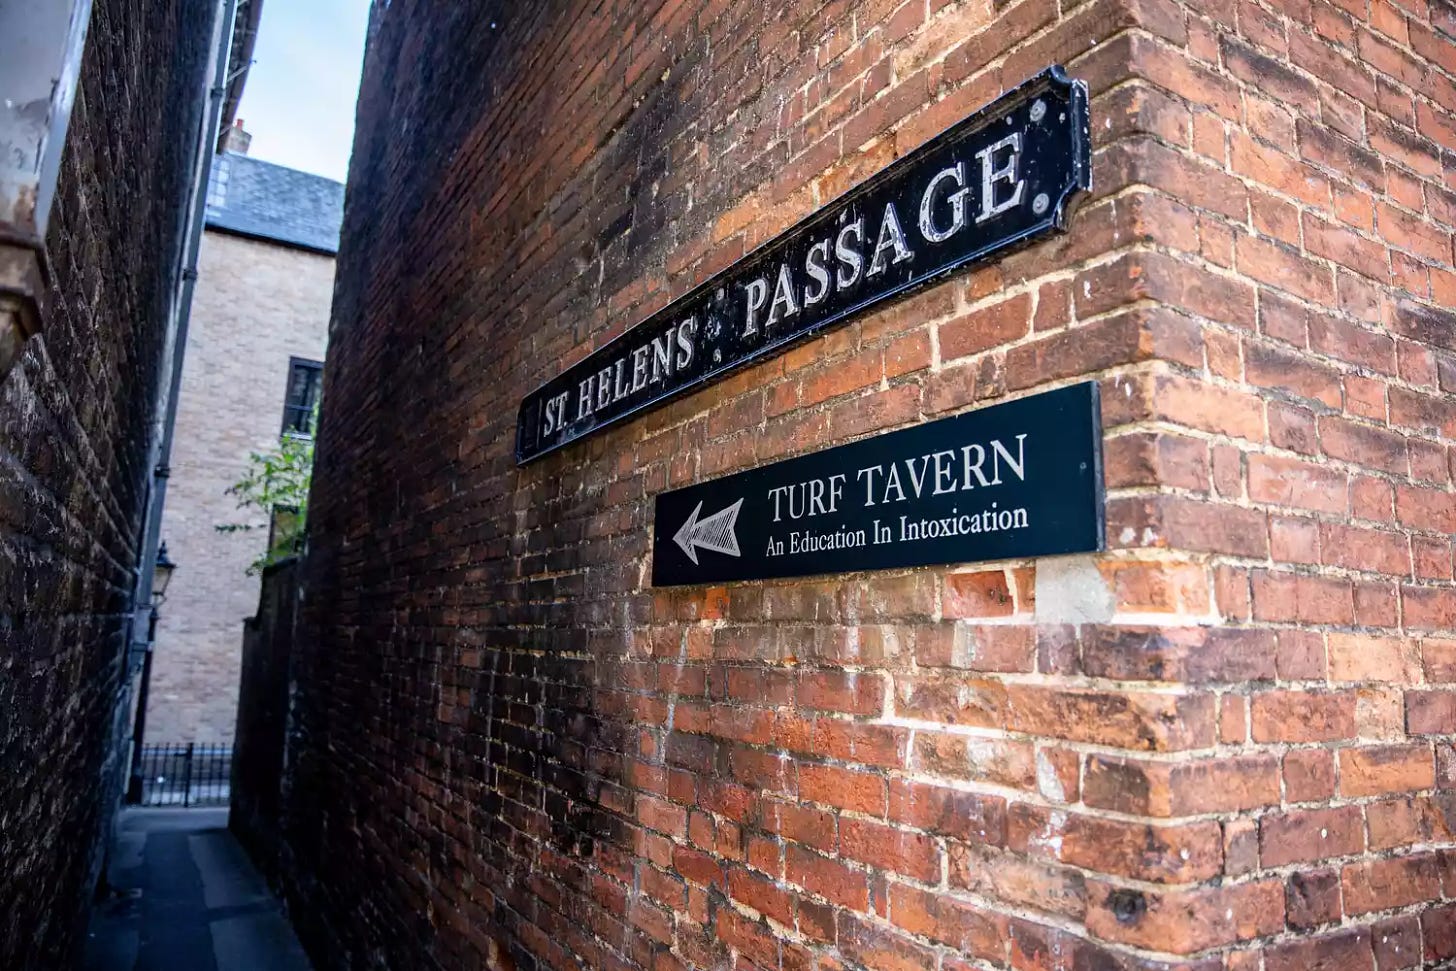 A sign pointing down an alley for Turf Tavern